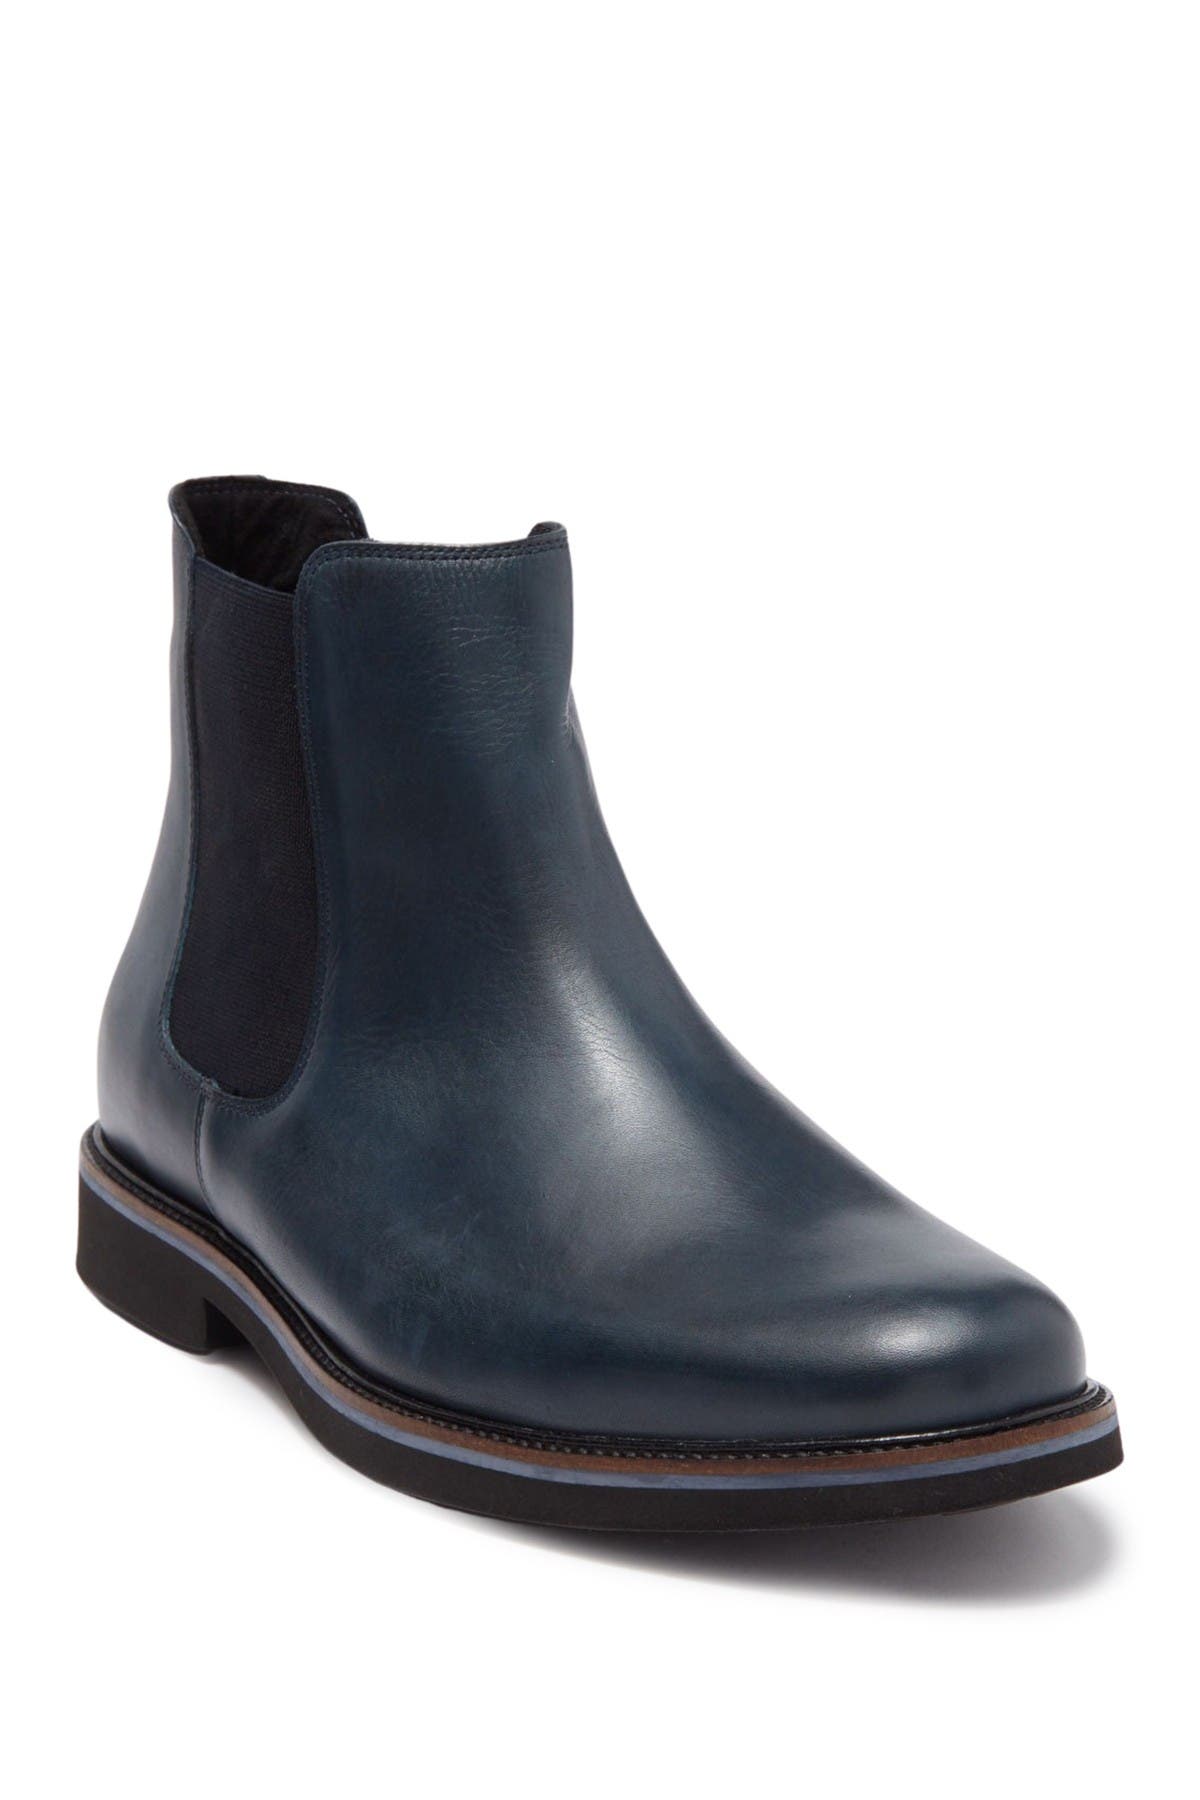 donald pliner camille leather boot